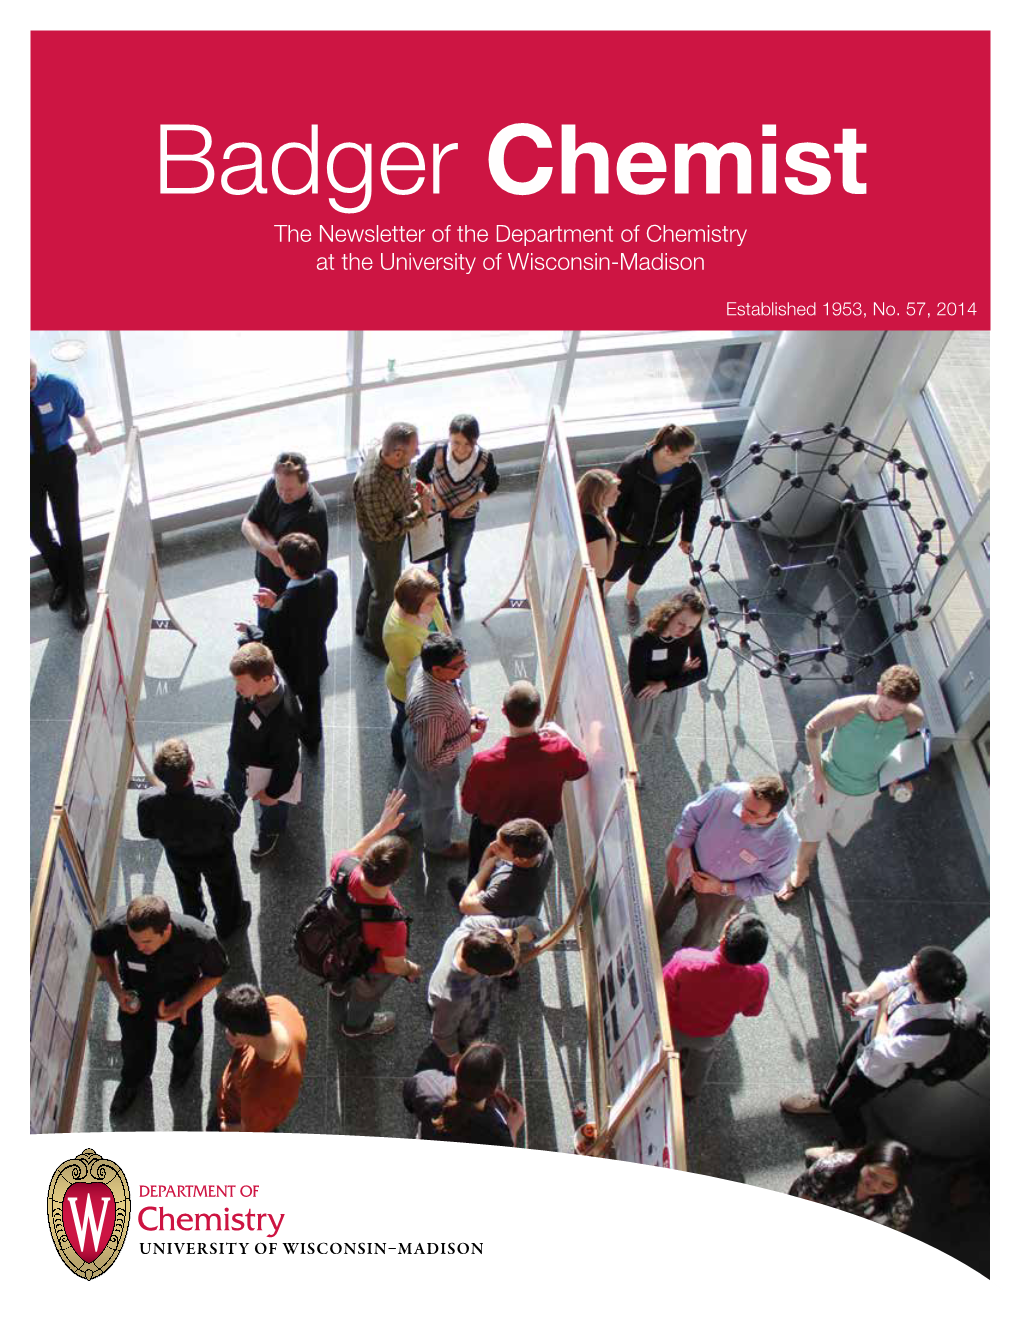 Badger Chemist the Newsletter of the Department of Chemistry at the University of Wisconsin-Madison